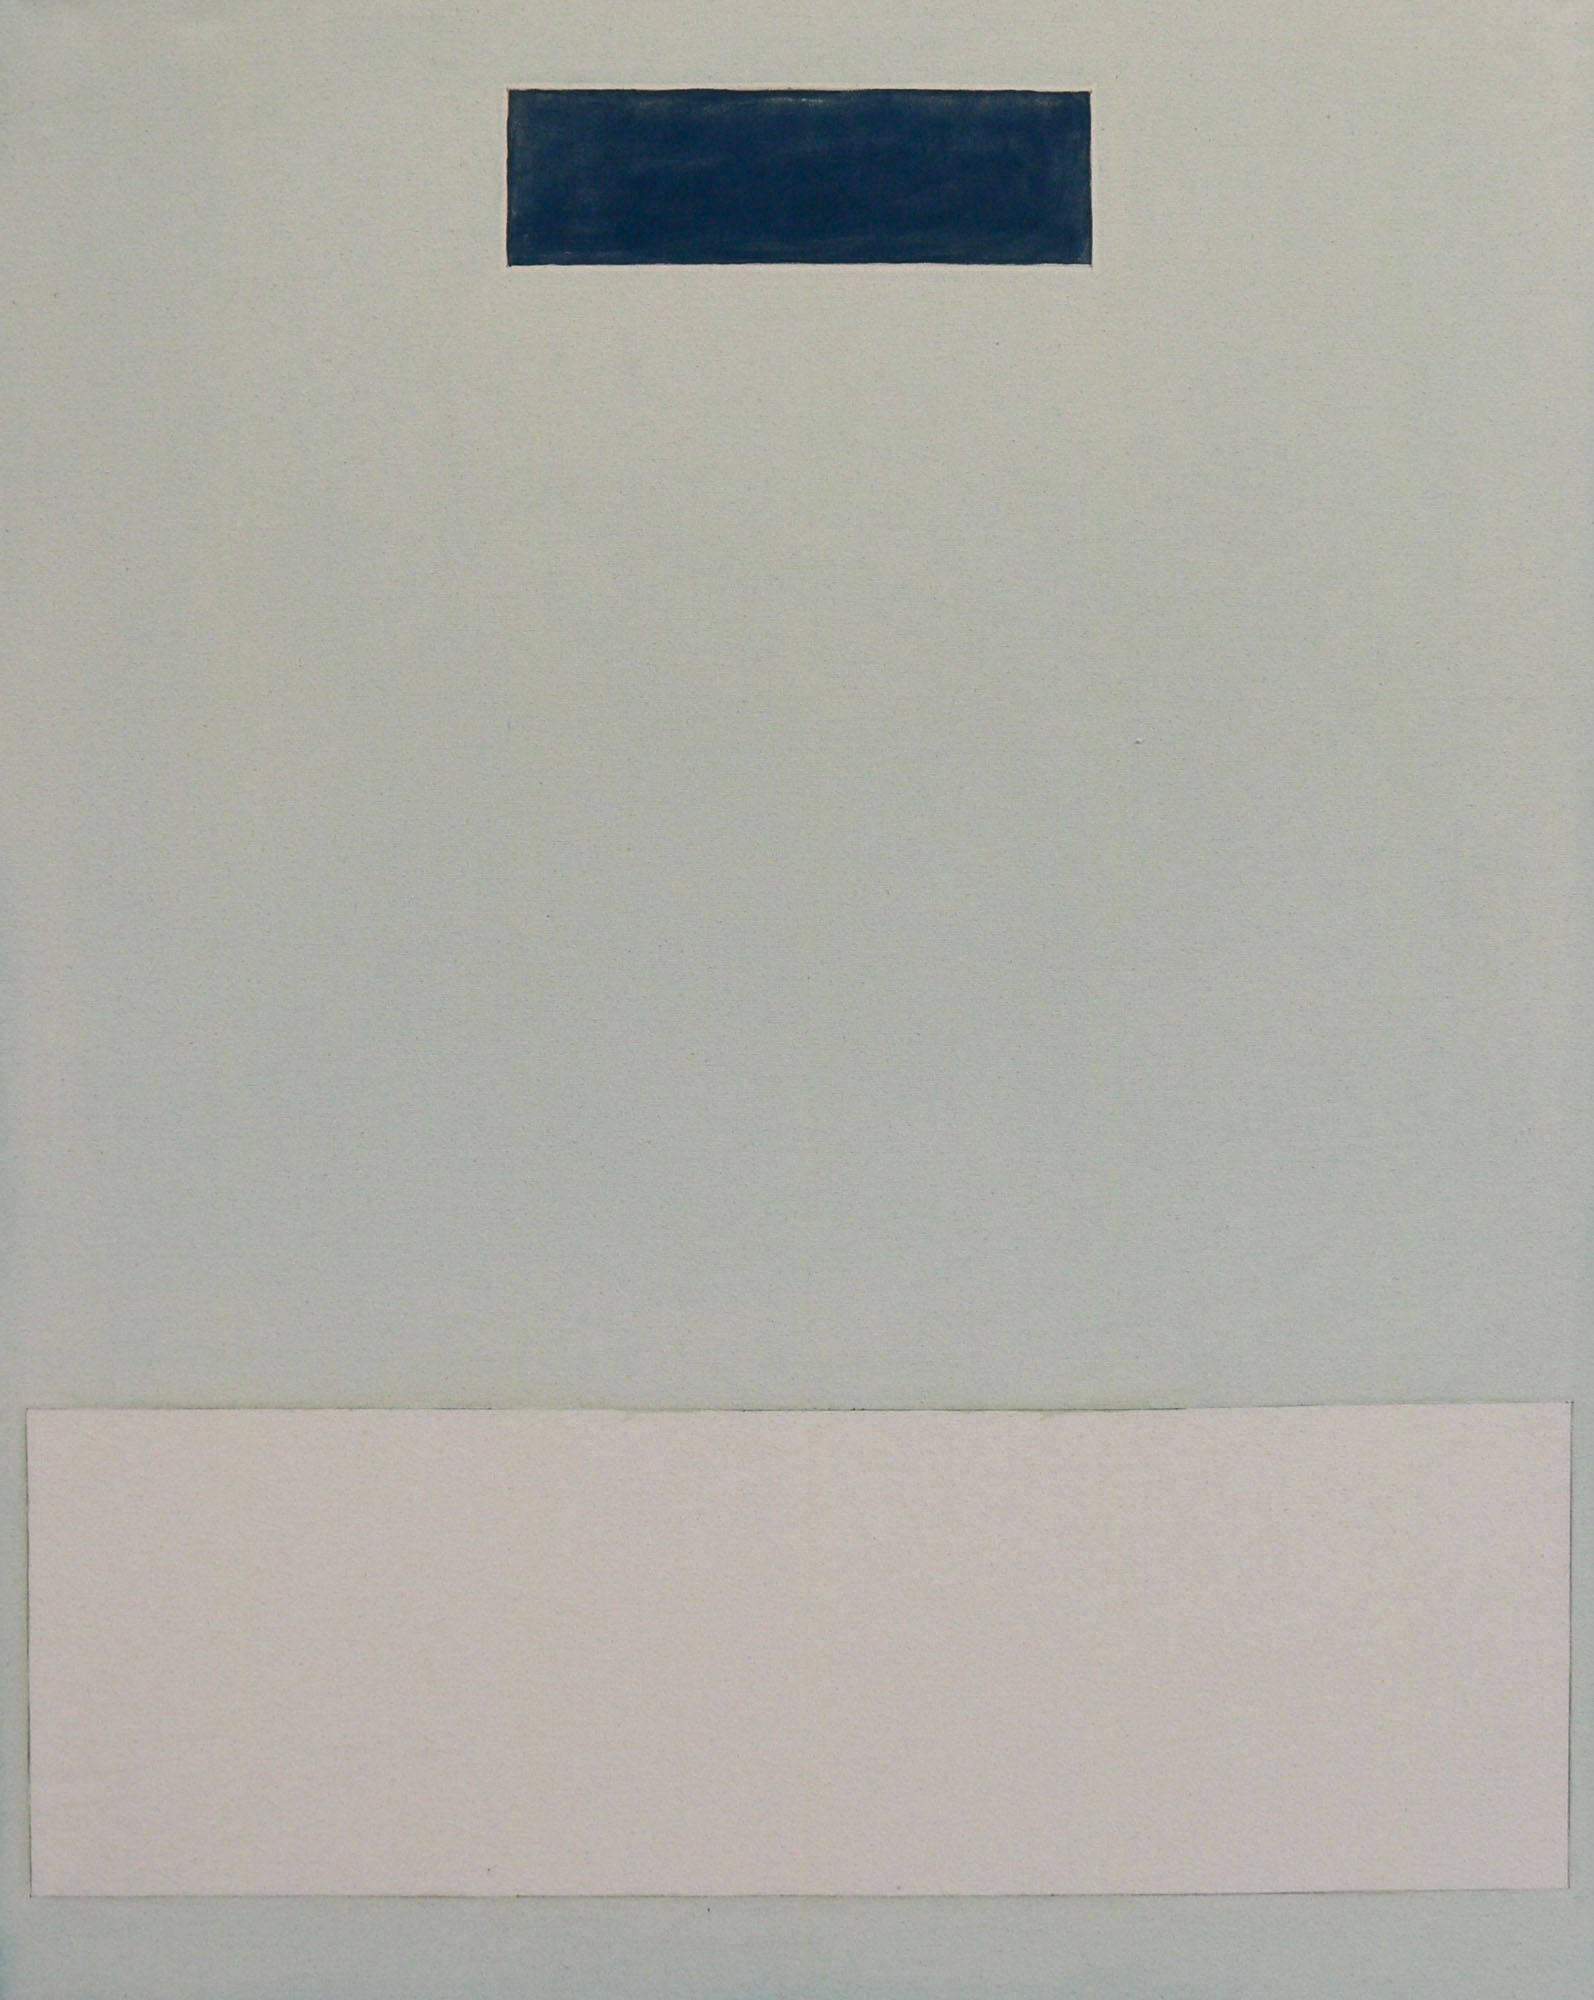 Photo of painting of two rectangles in different tones of blue